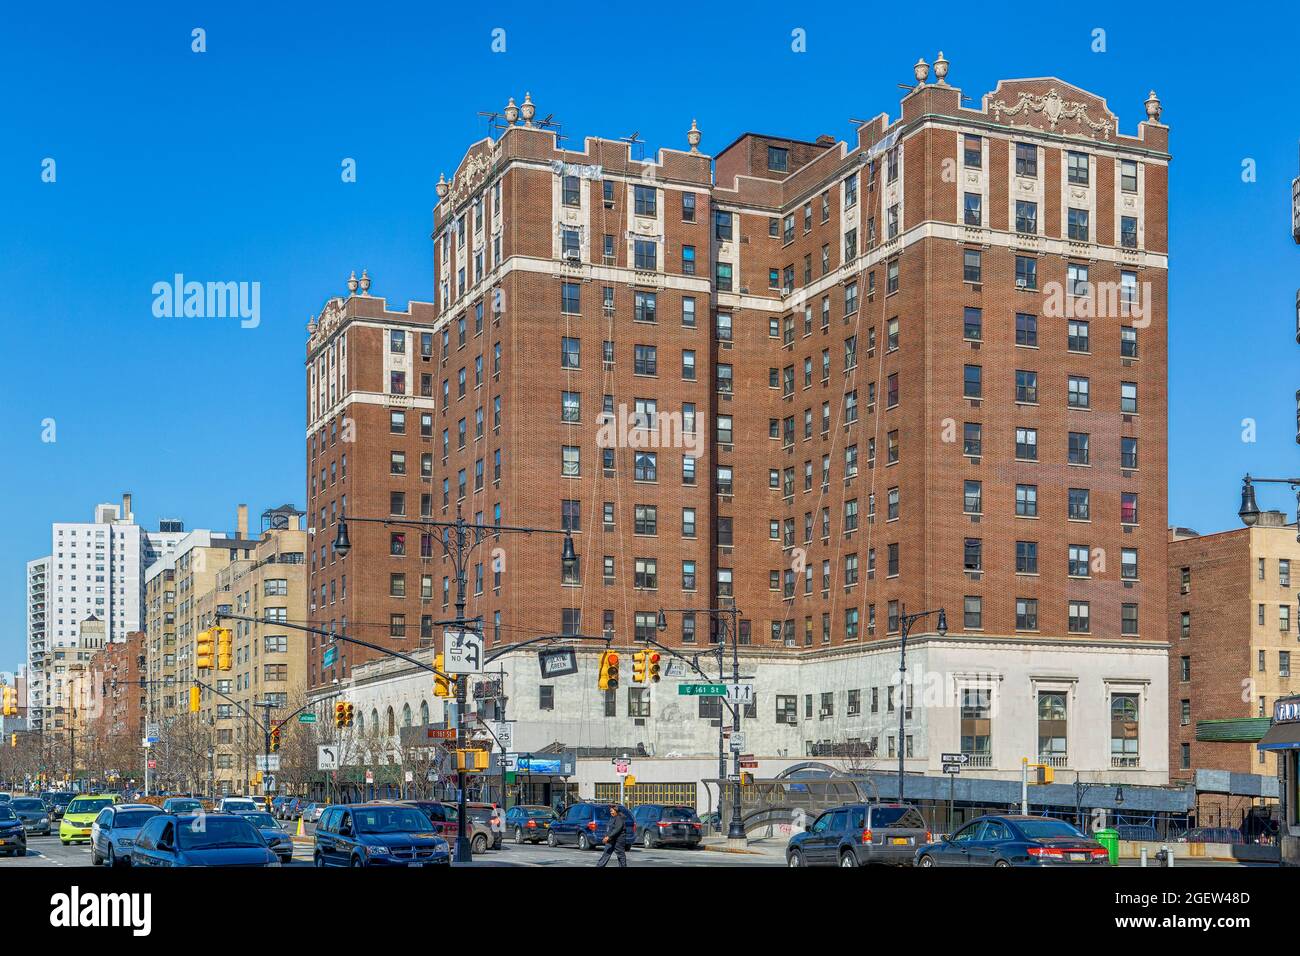 900 Grand Concourse, Concourse Plaza, was designed as a hotel by Maynicke & Franke. It is now apartments in the Grand Concourse Historic District. Stock Photo